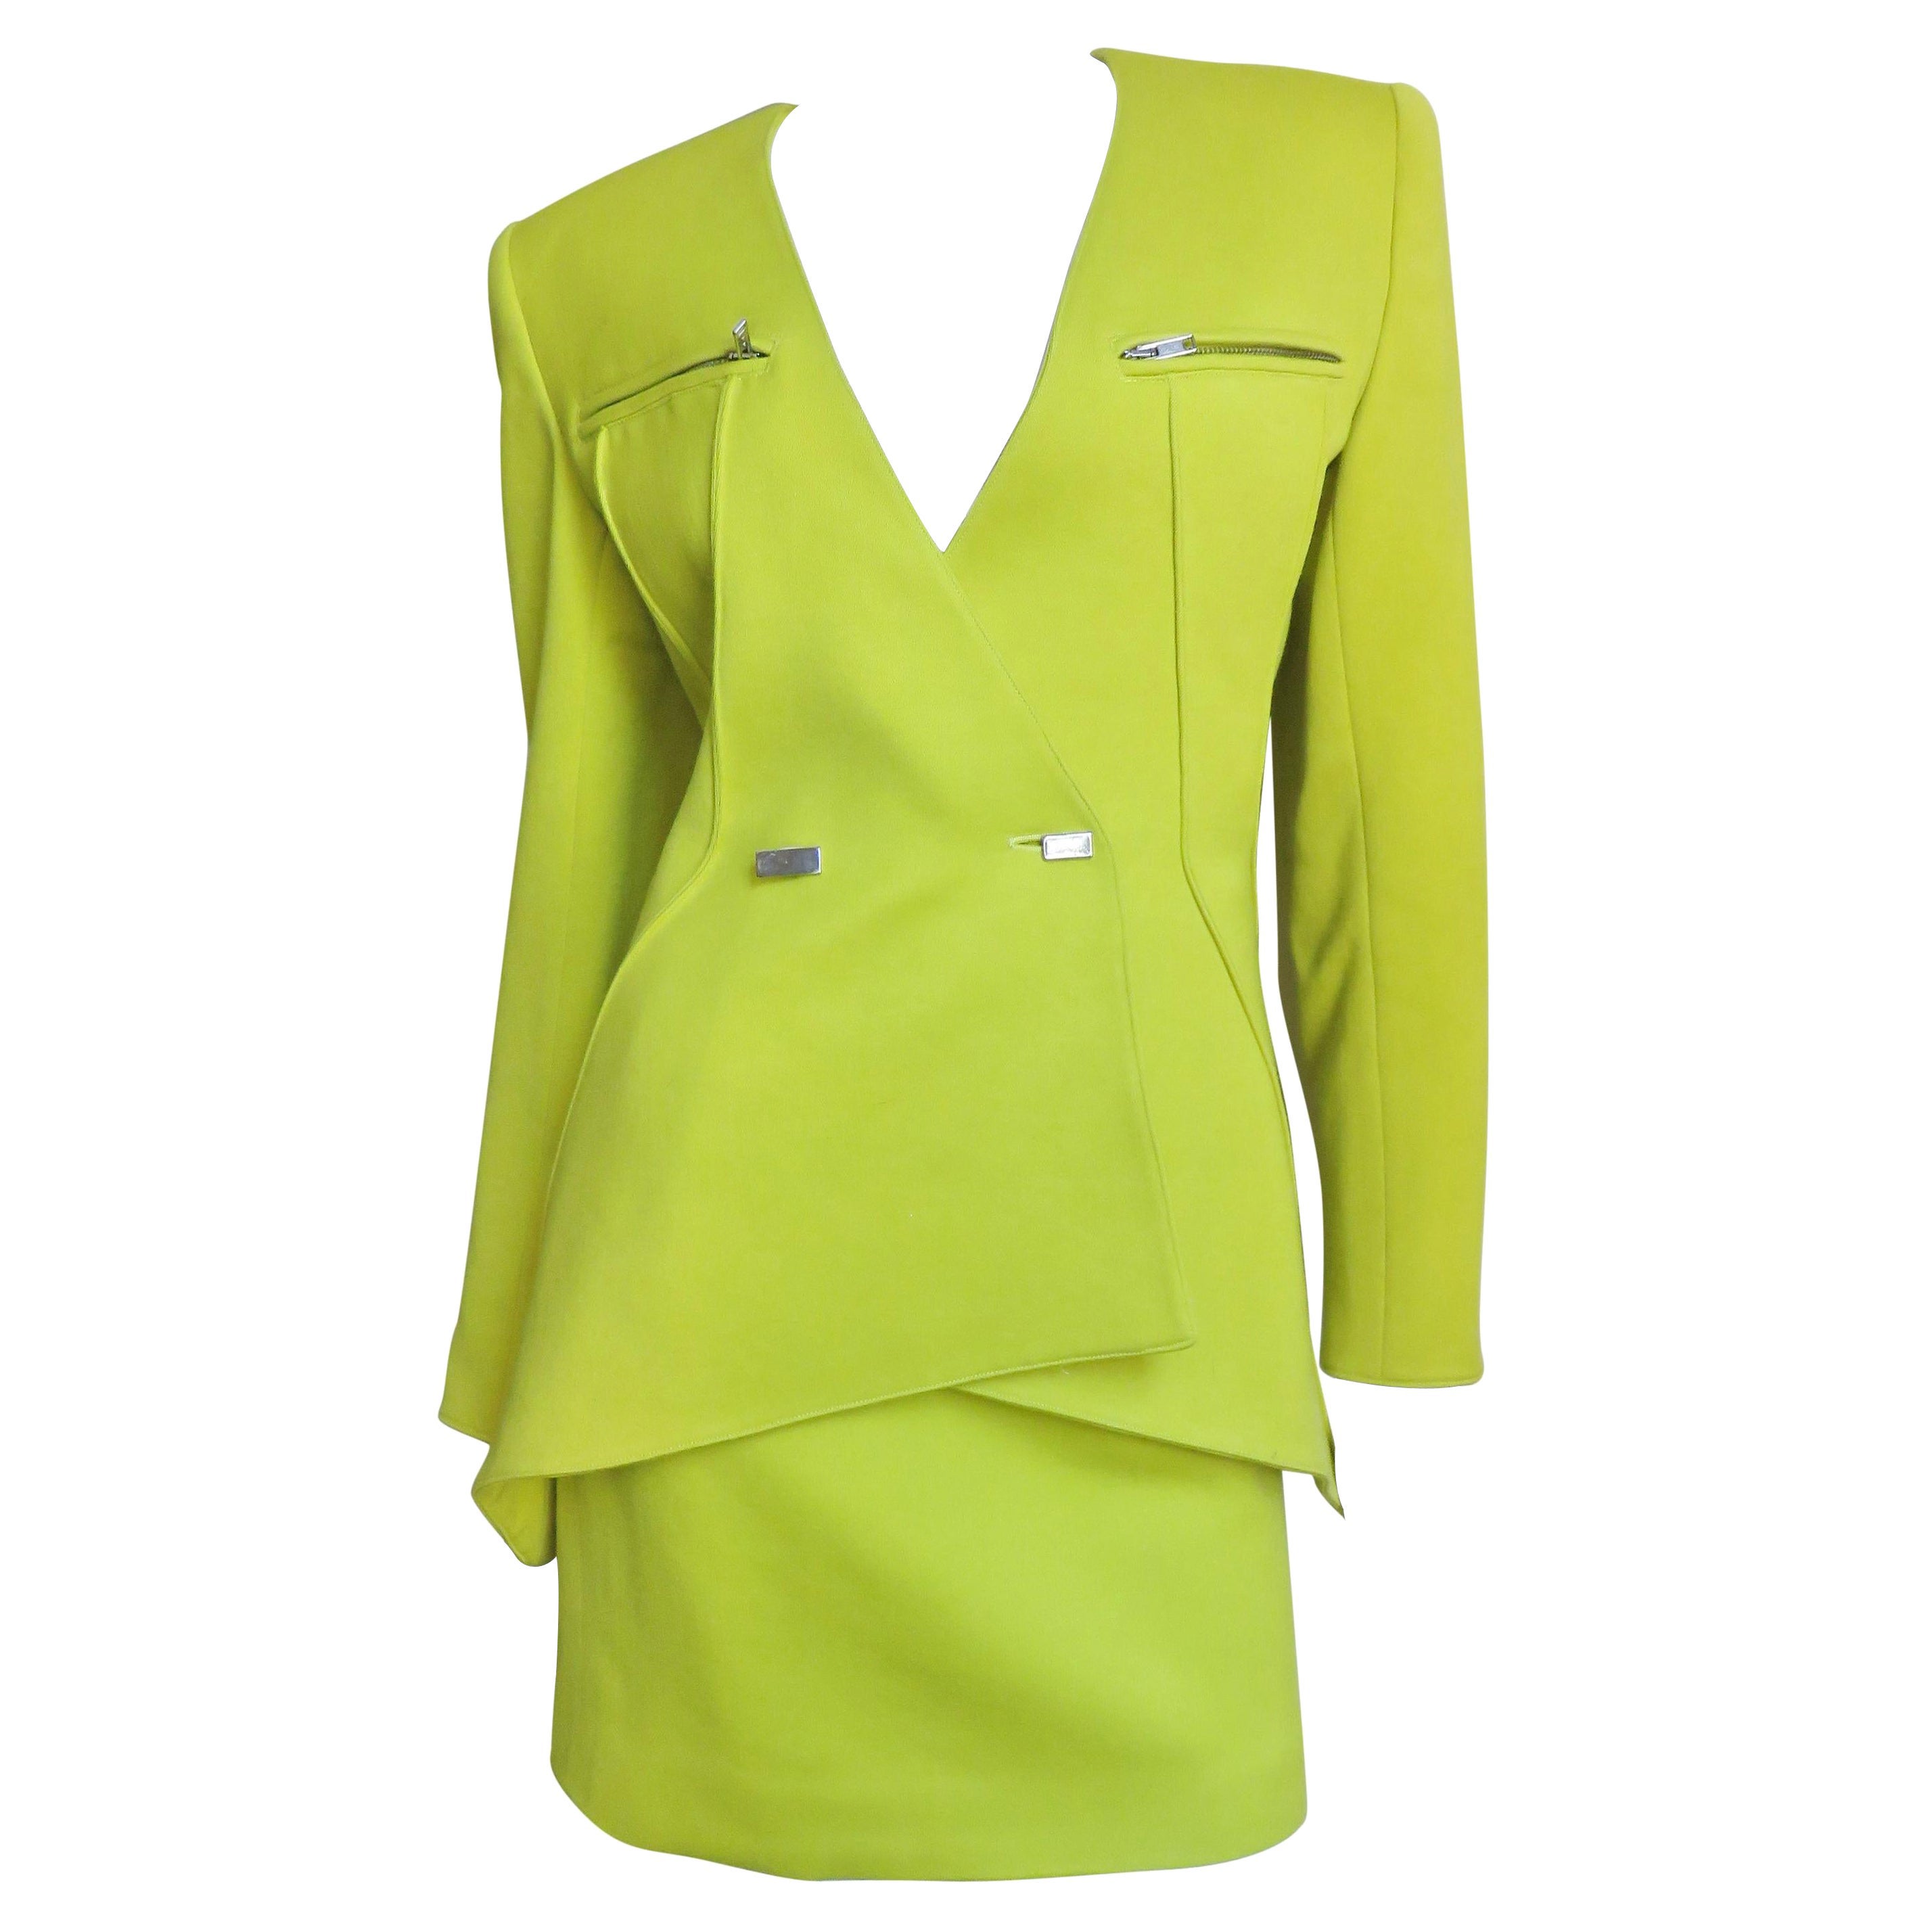  Claude Montana New Neon Futuristic Skirt Suit A/W 1991 For Sale